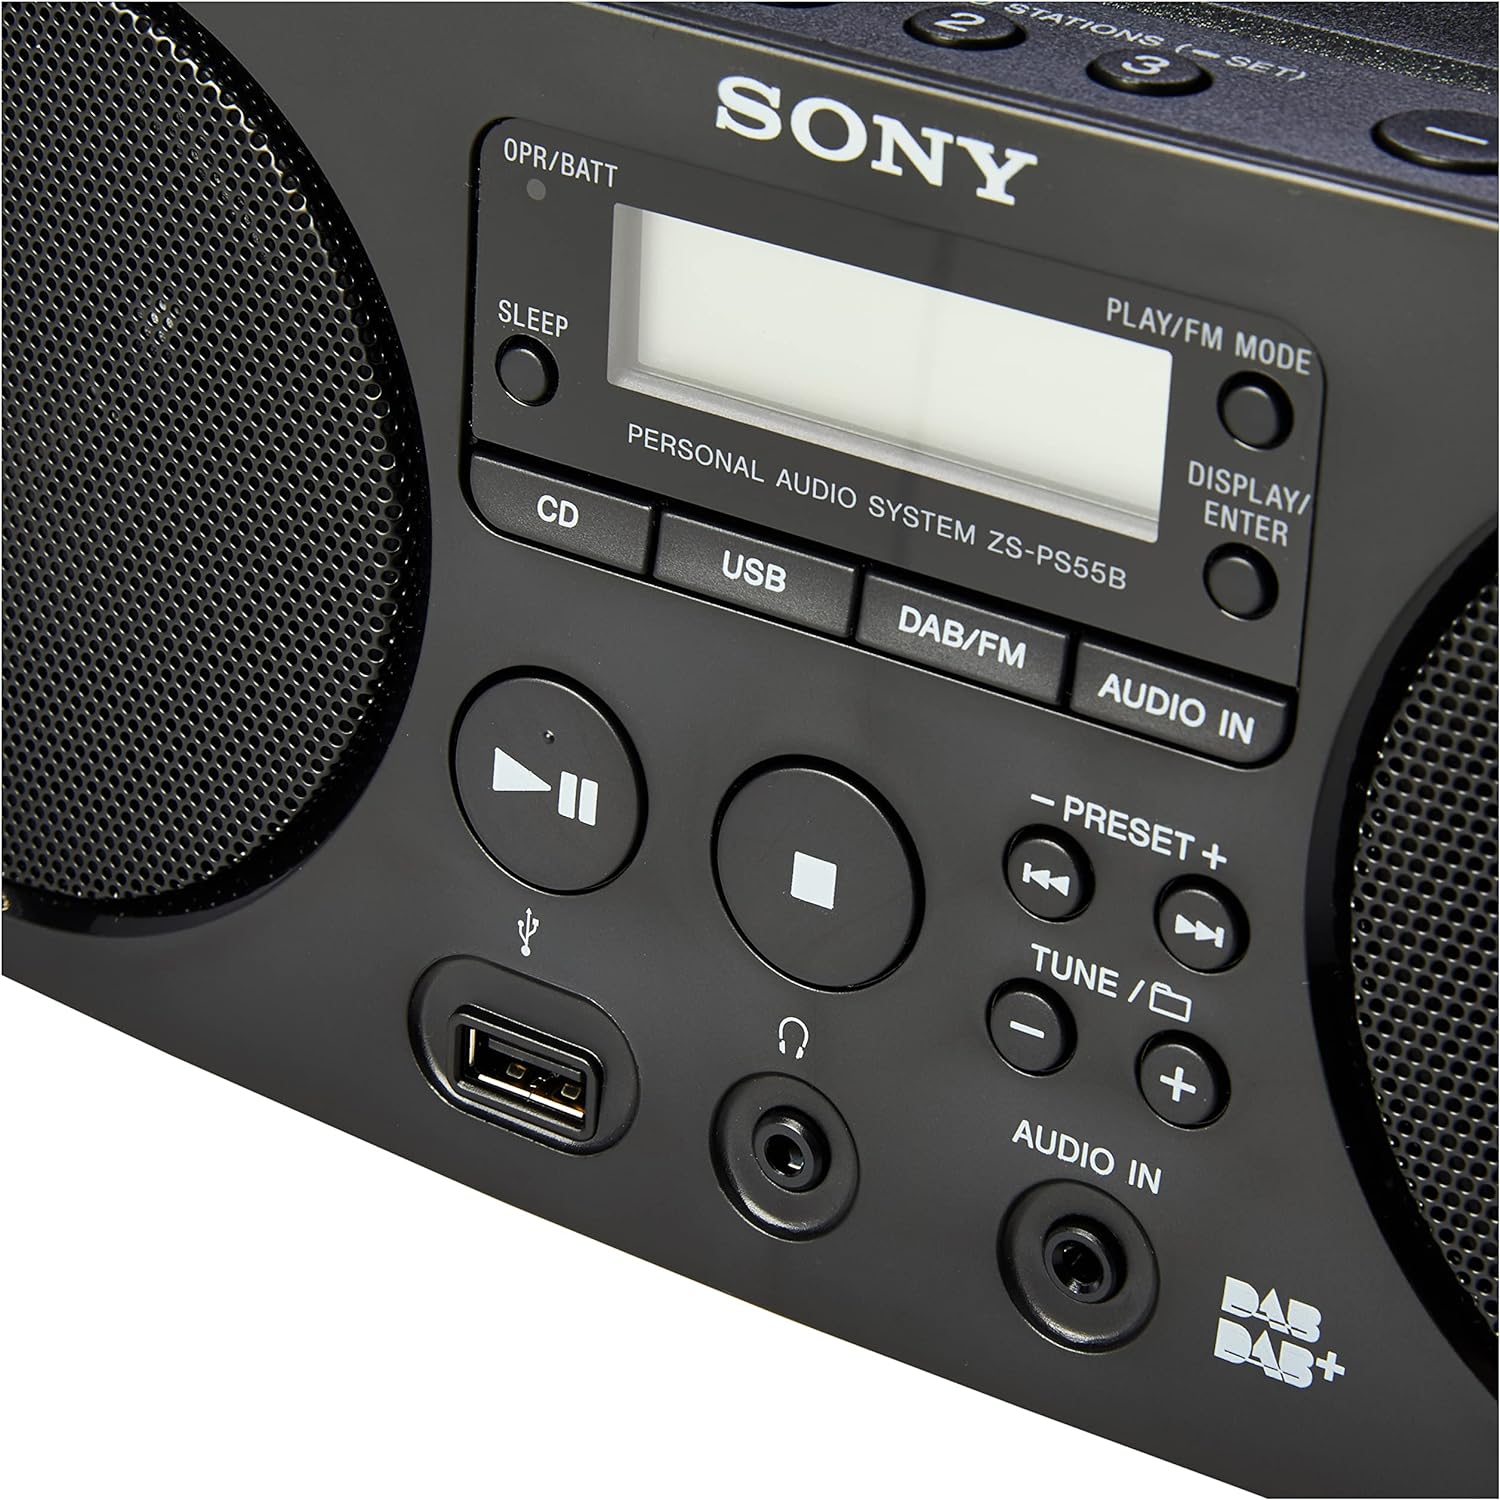 Sony ZS-PS55B CD Boombox with DAB and FM Radio – Black – Basil Knipe  Electrics